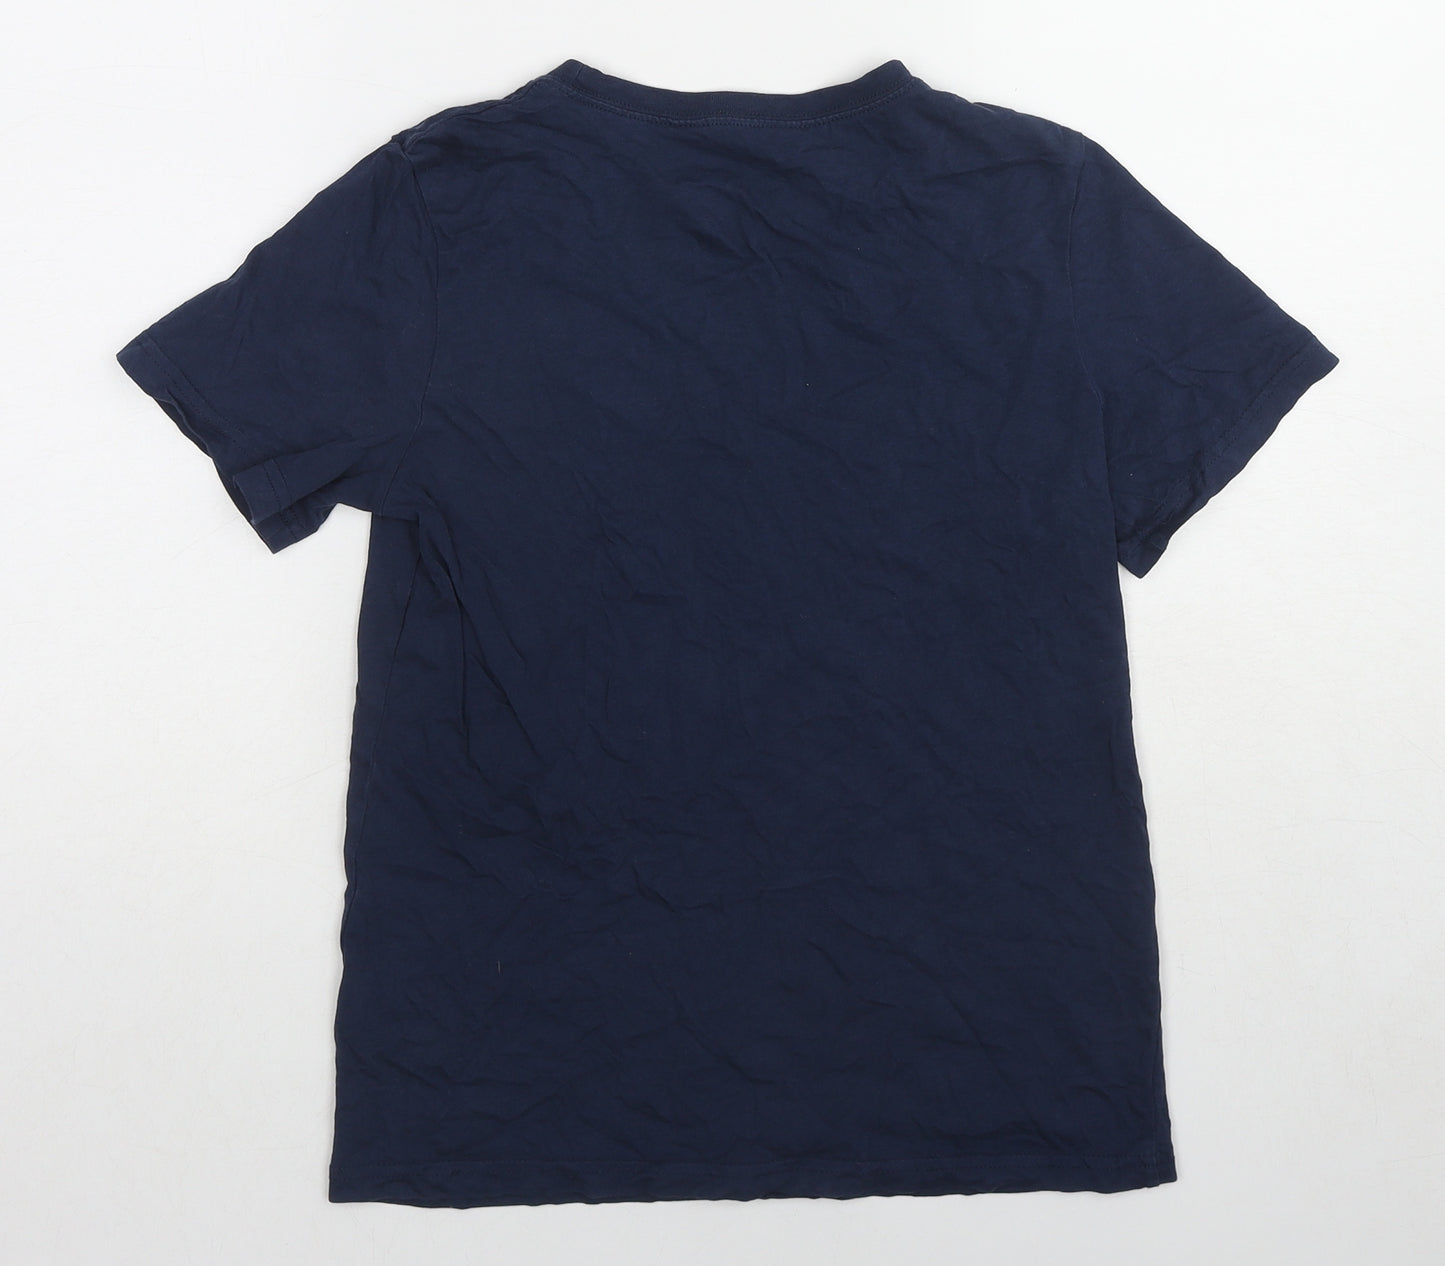 H&M Boys Blue Cotton Basic T-Shirt Size 11-12 Years Round Neck Pullover - 5 More Minutes Gamer